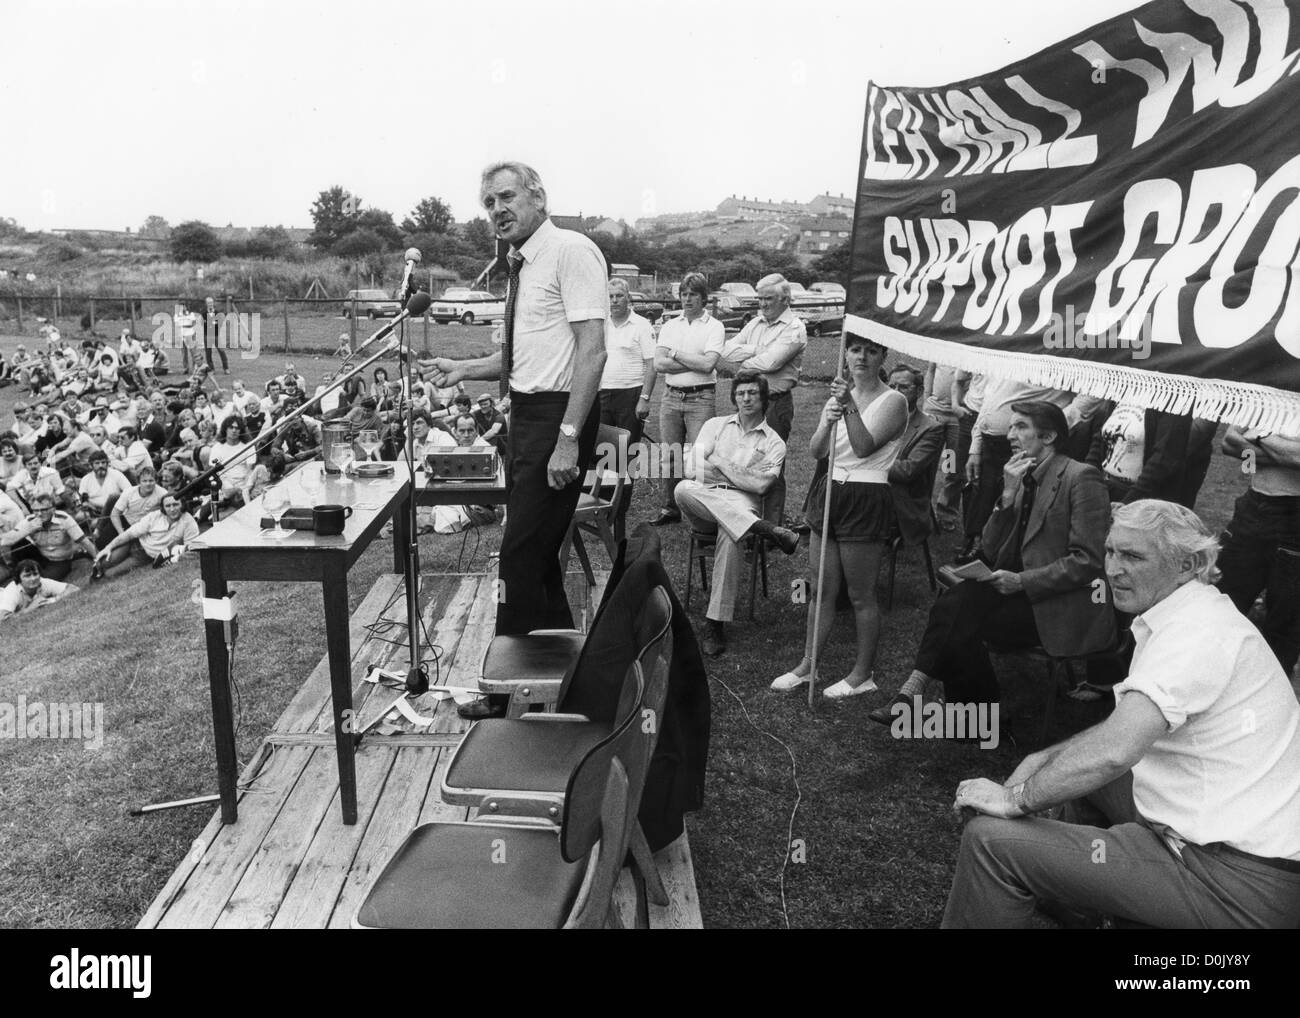 National Union of Mineworkers General Secretary Peter Heathfield speaking at Miners Rally in Rugeley during the 1984 miners strike. PICTURE BY DAVID BAGNALL. industrial action working class movement rally meeting 1980s Britain politics political Uk Stock Photo